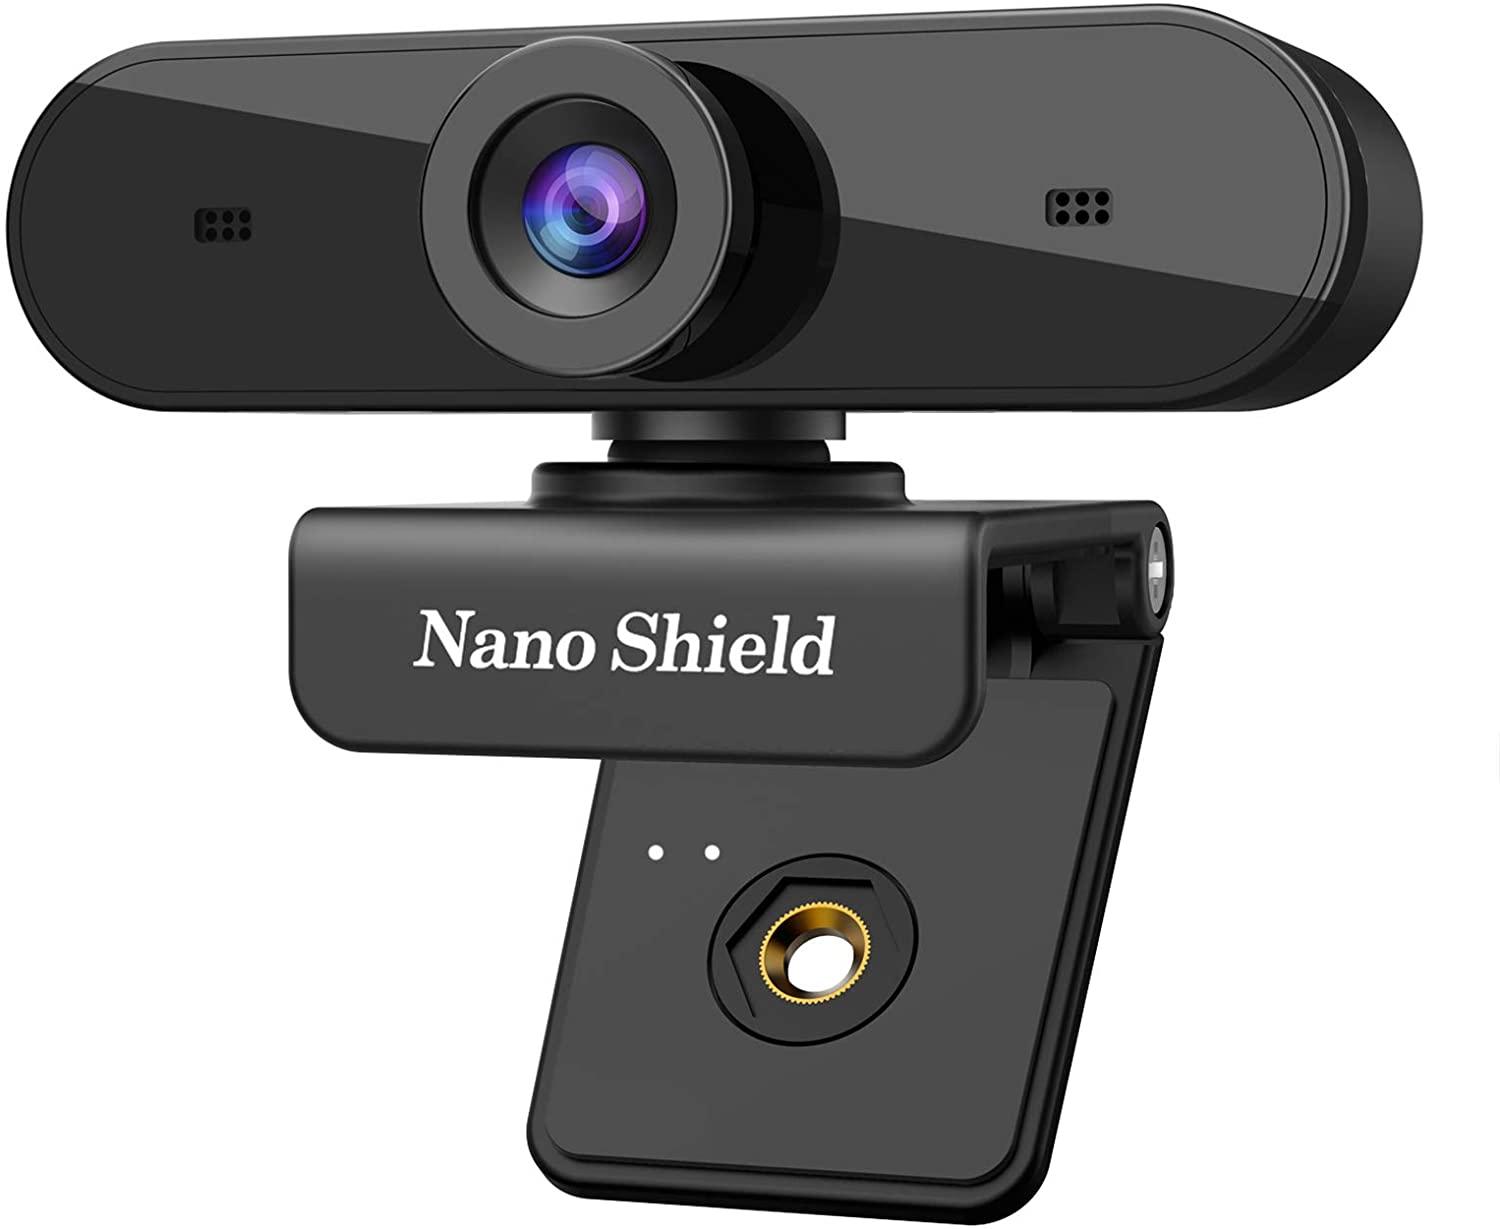 1080P USB Webcam with Stereo Microphones for $9.99 Shipped